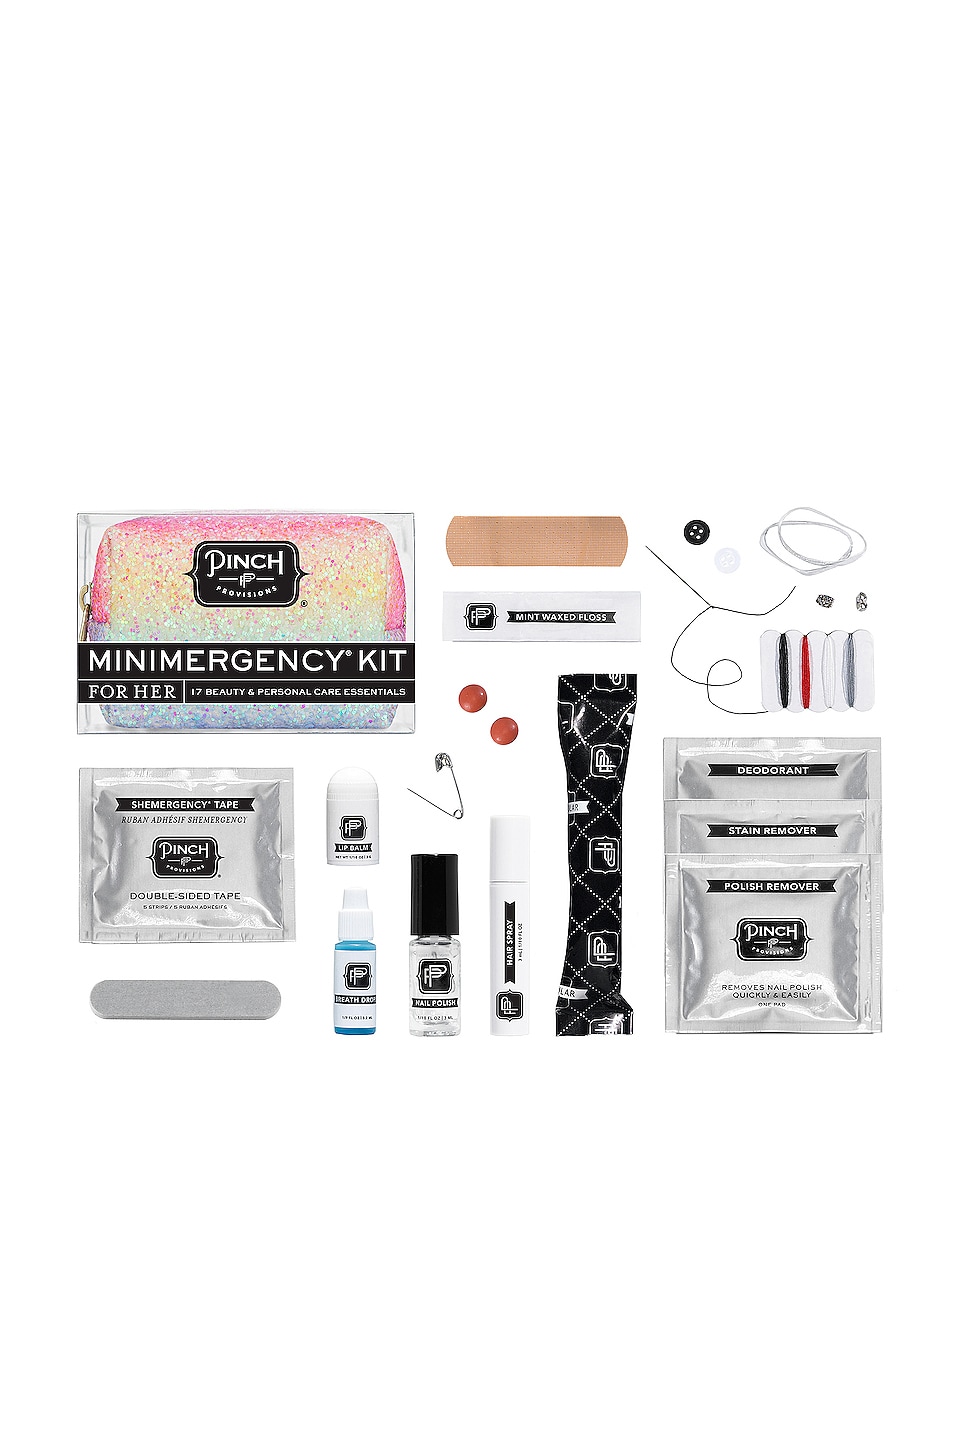 Shop Pinch Provisions Minimergency Kit In N,a